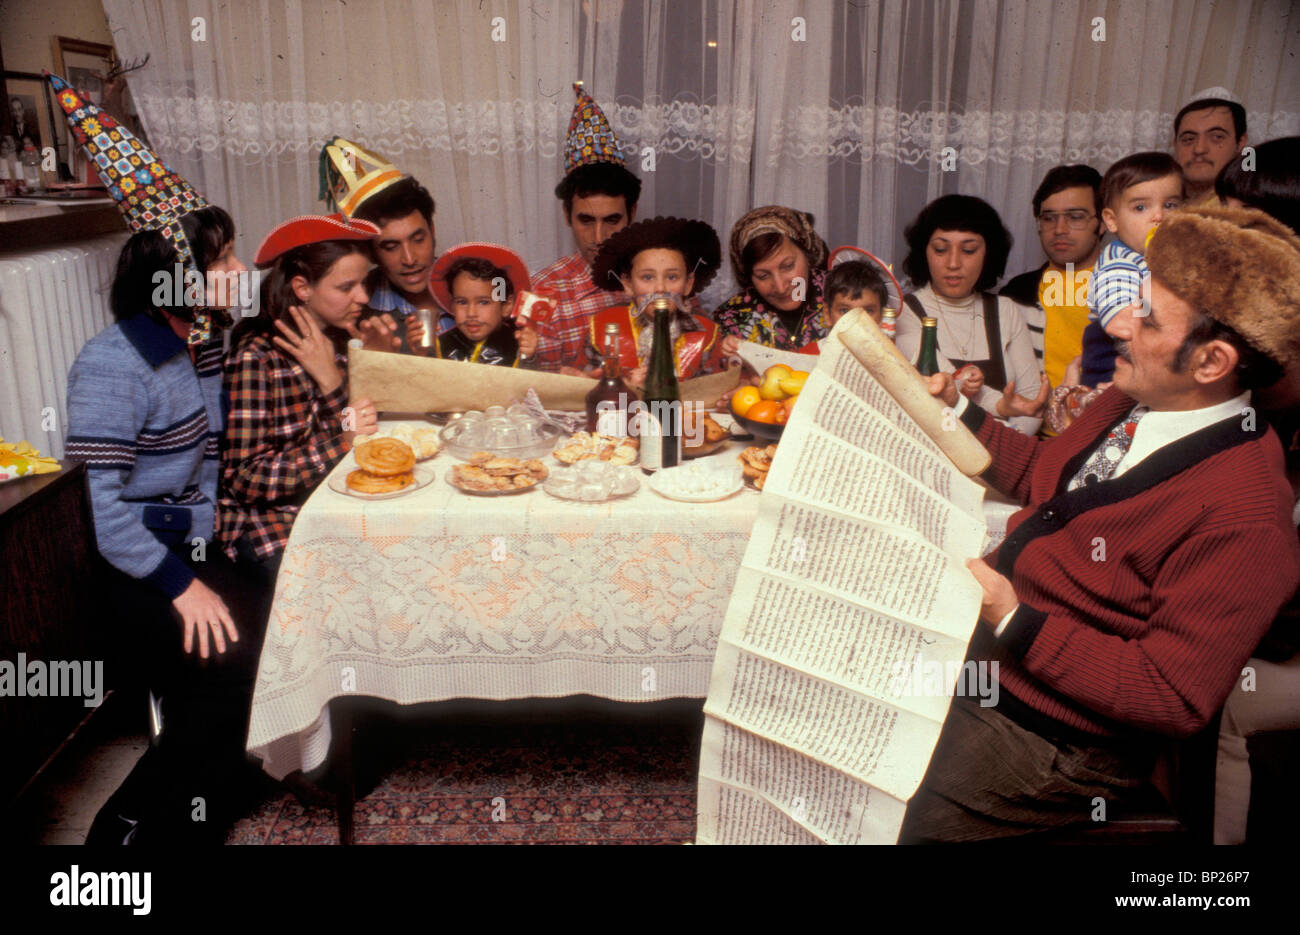 1234. PURIM - A FAMILY ORIGINATING FROM IRAQ READING THE ESTER SCROLL, NOTE THE CHILDREN DRESSED UP FOR THE FEAST Stock Photo